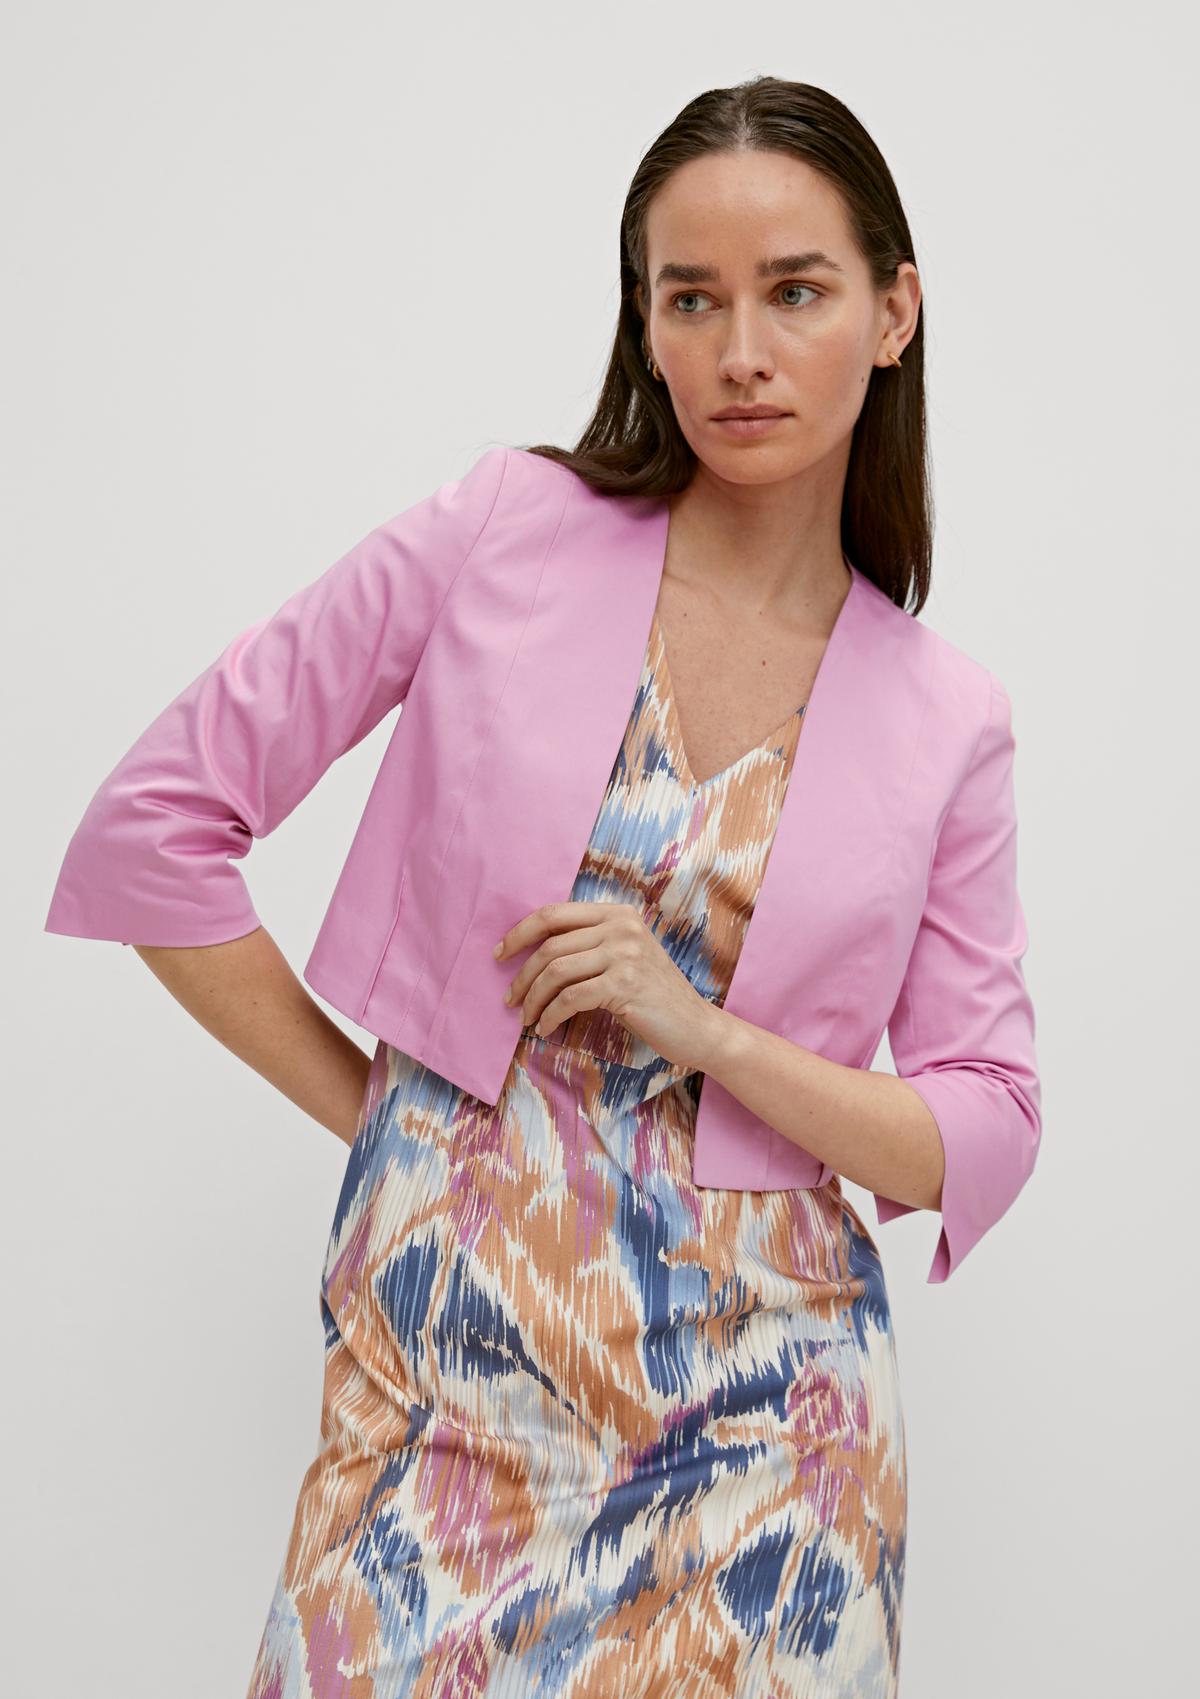 comma Cropped jacket in cotton satin